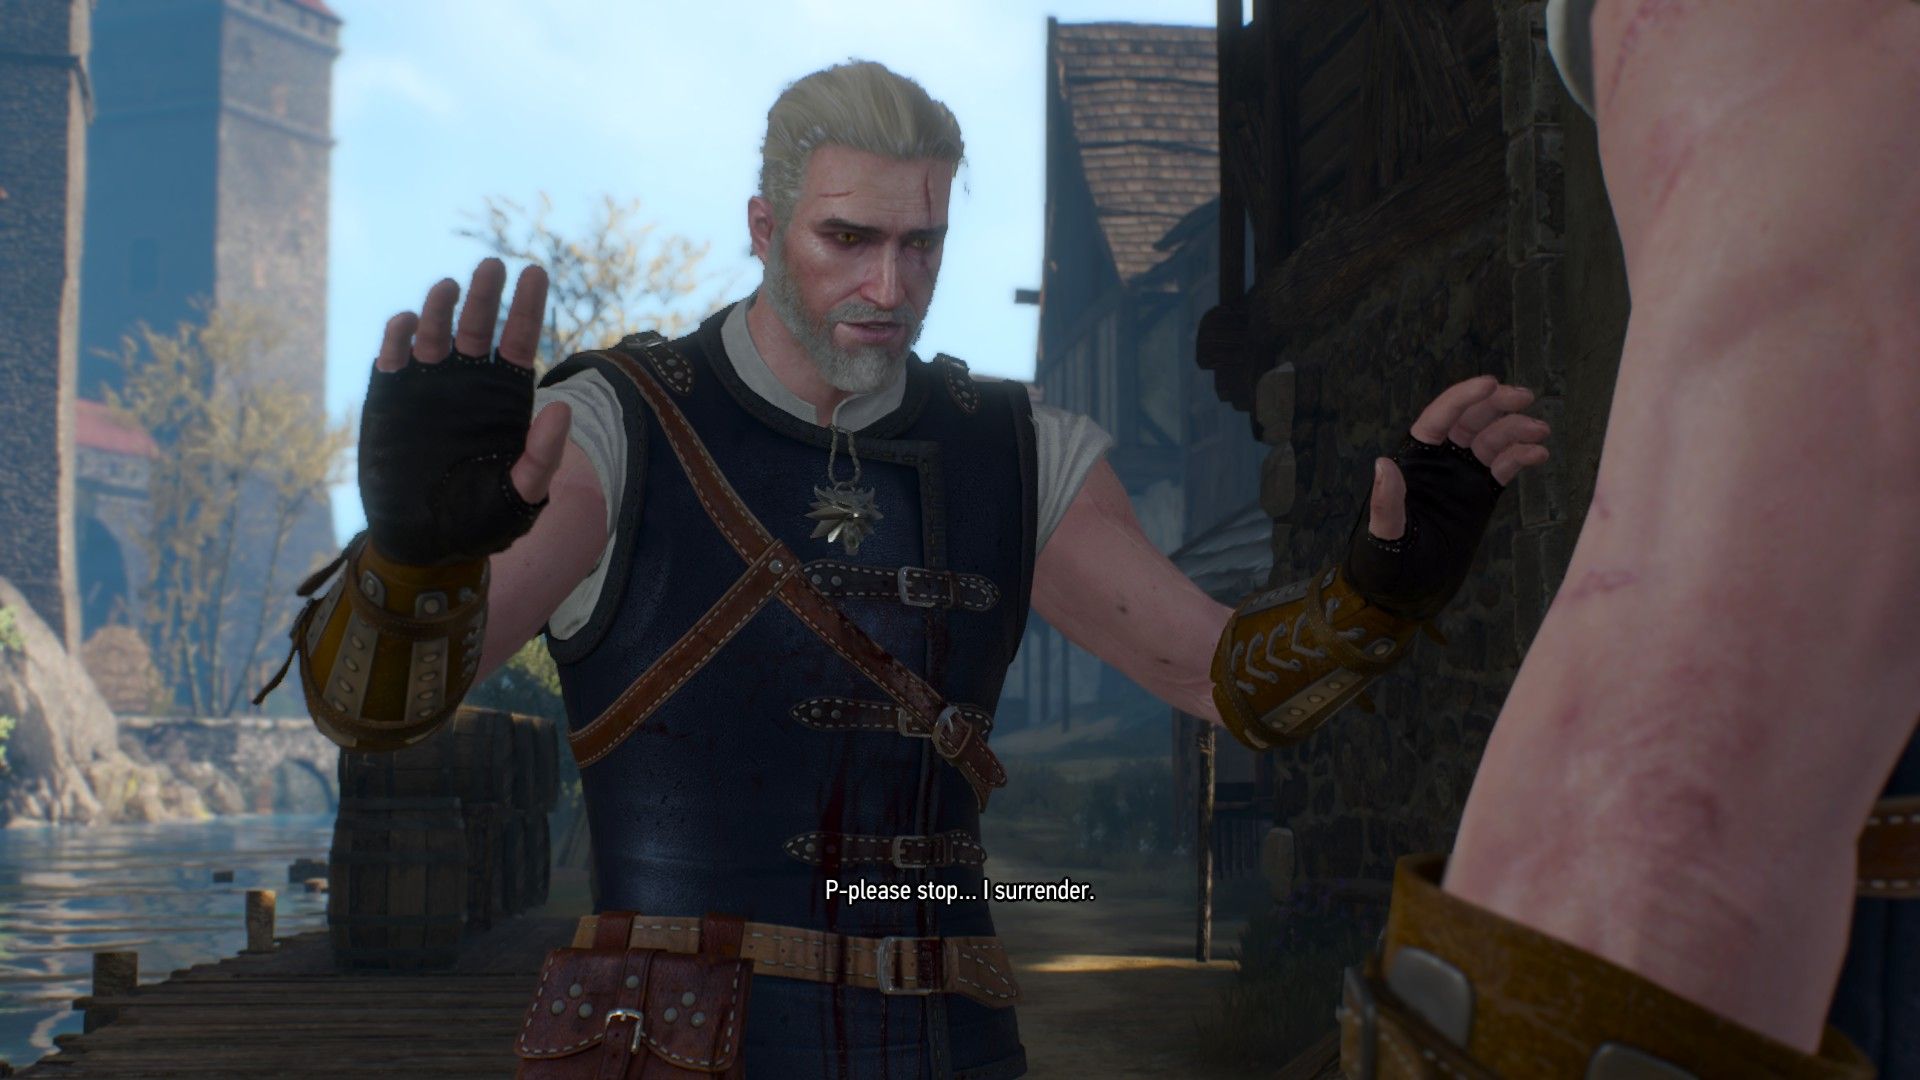 A doppler assuming Geralt's form raises his hand in surrender after being cornered by the Witcher.